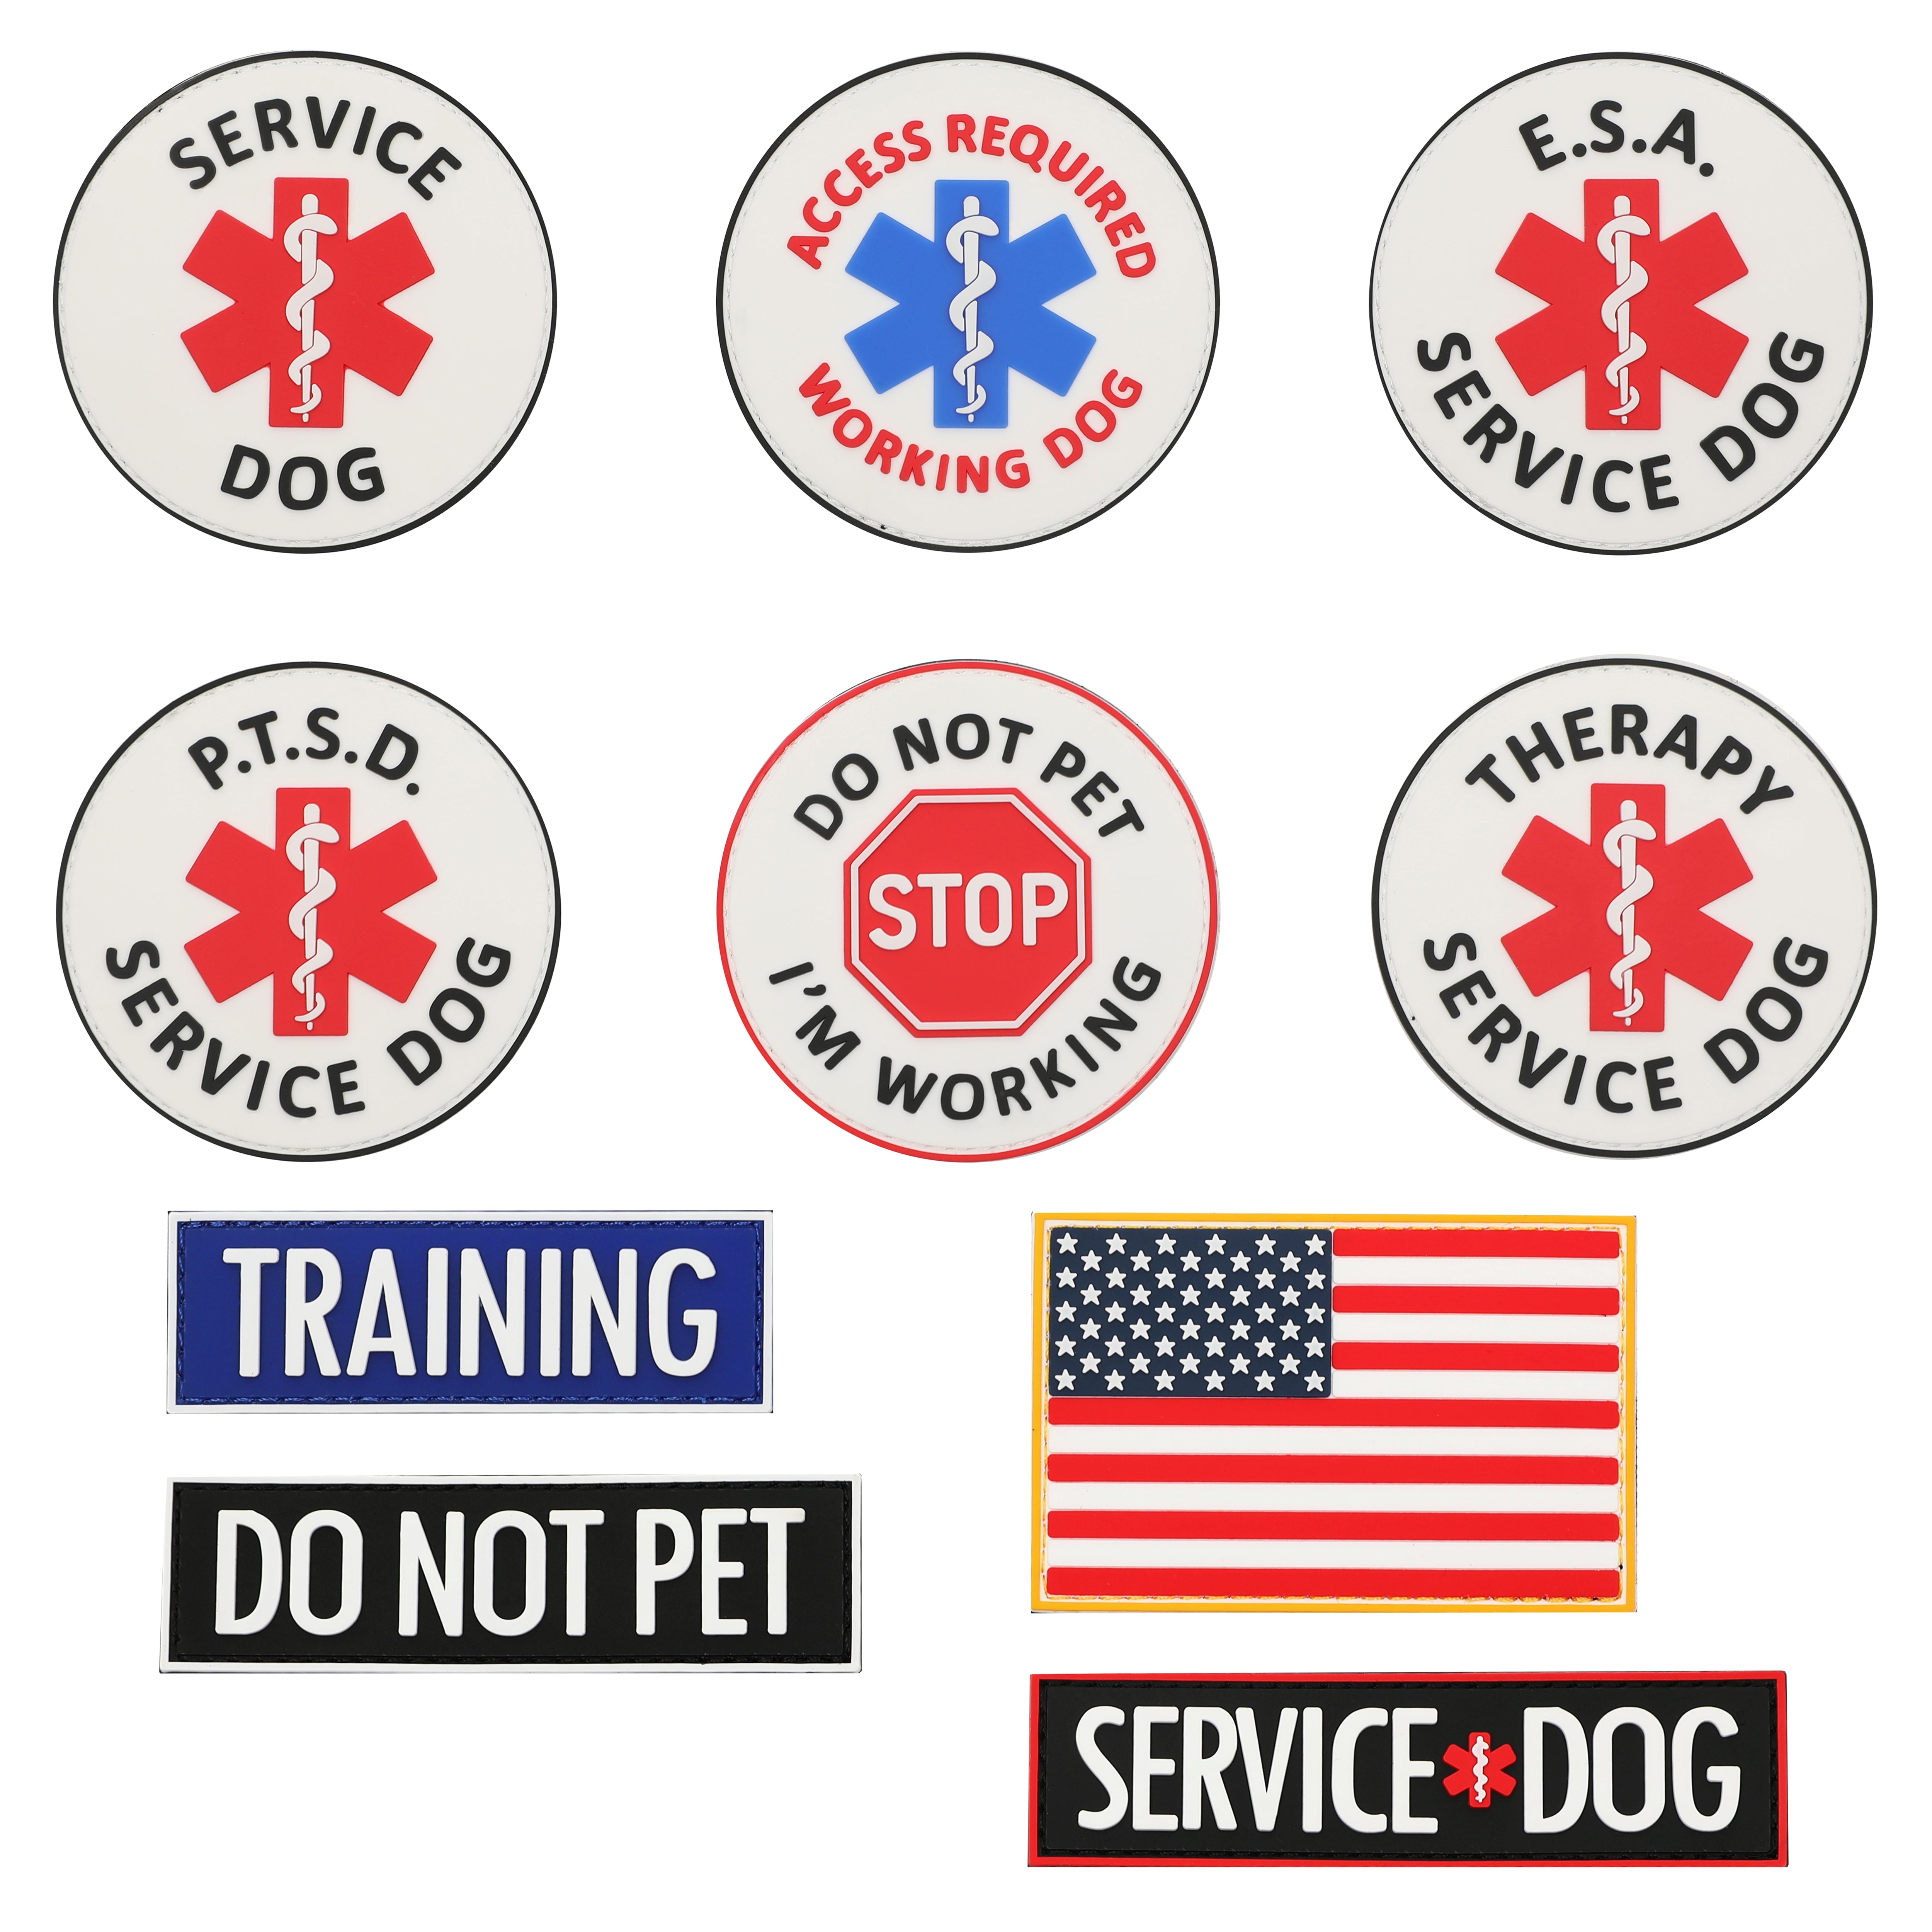 10 Pieces PVC Service Dog Vest Patch with Velcro for Dog Harness